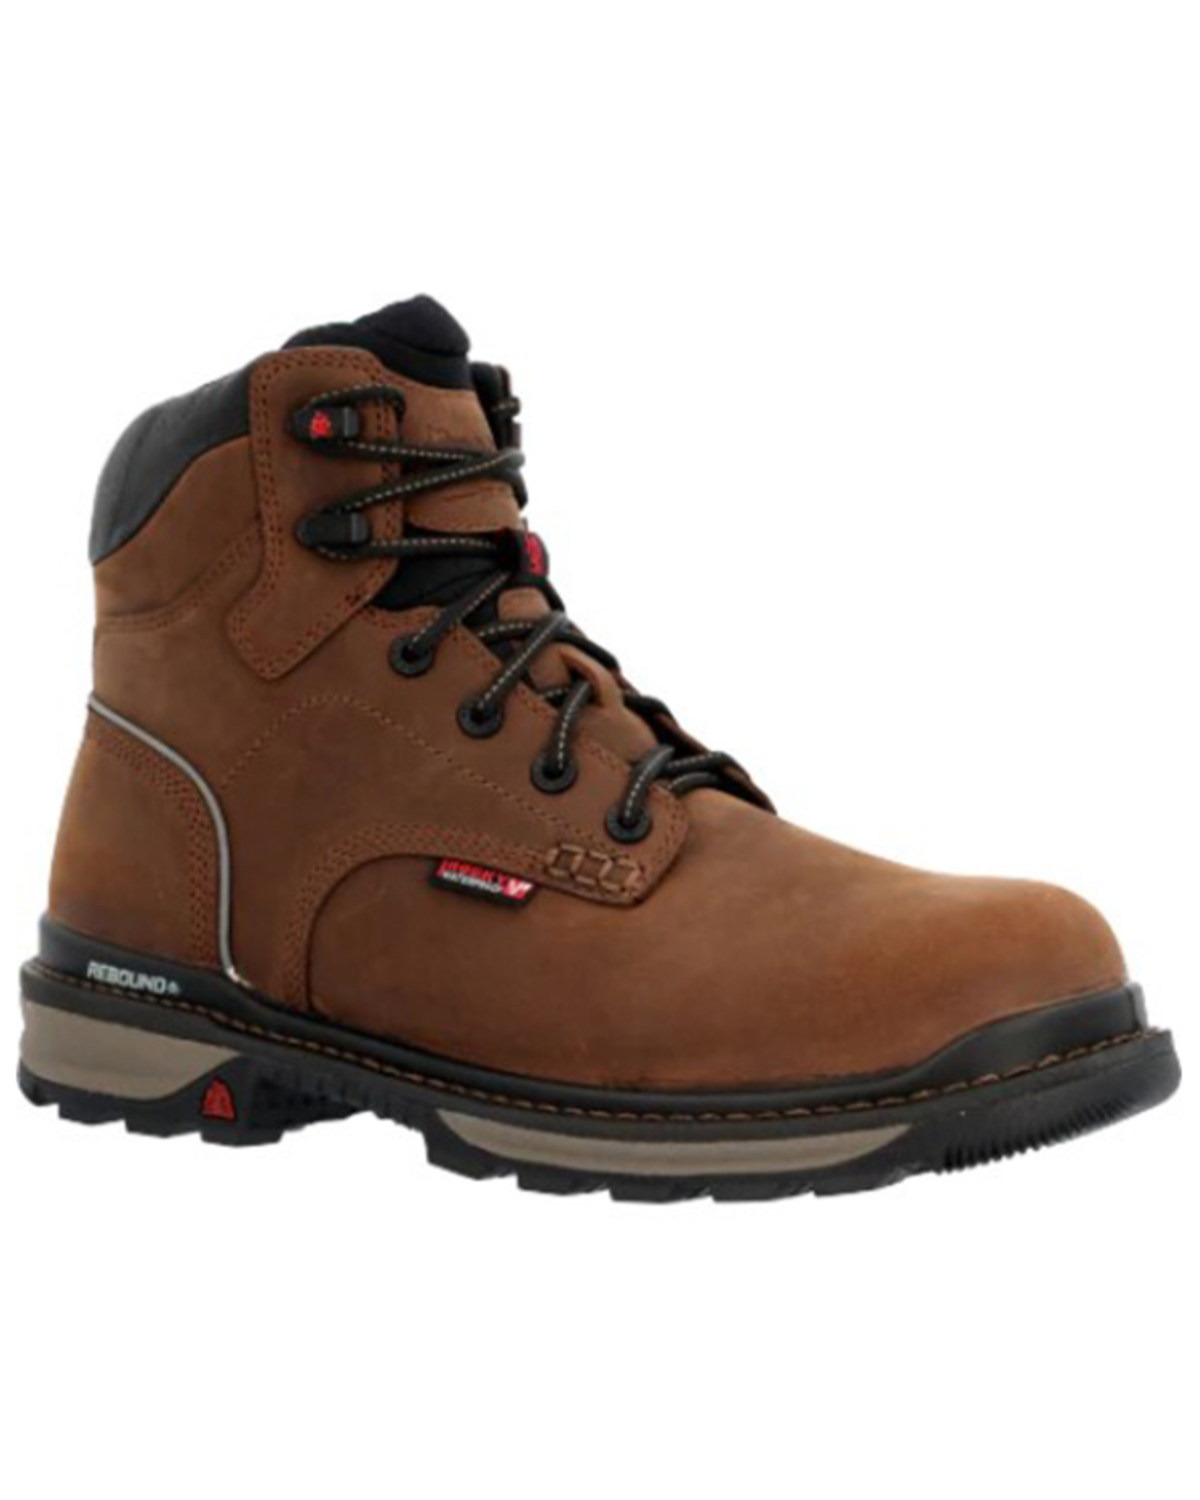 Rocky Men's Rams Horn 6" Lace-Up Waterproof Work Boots - Composite Toe